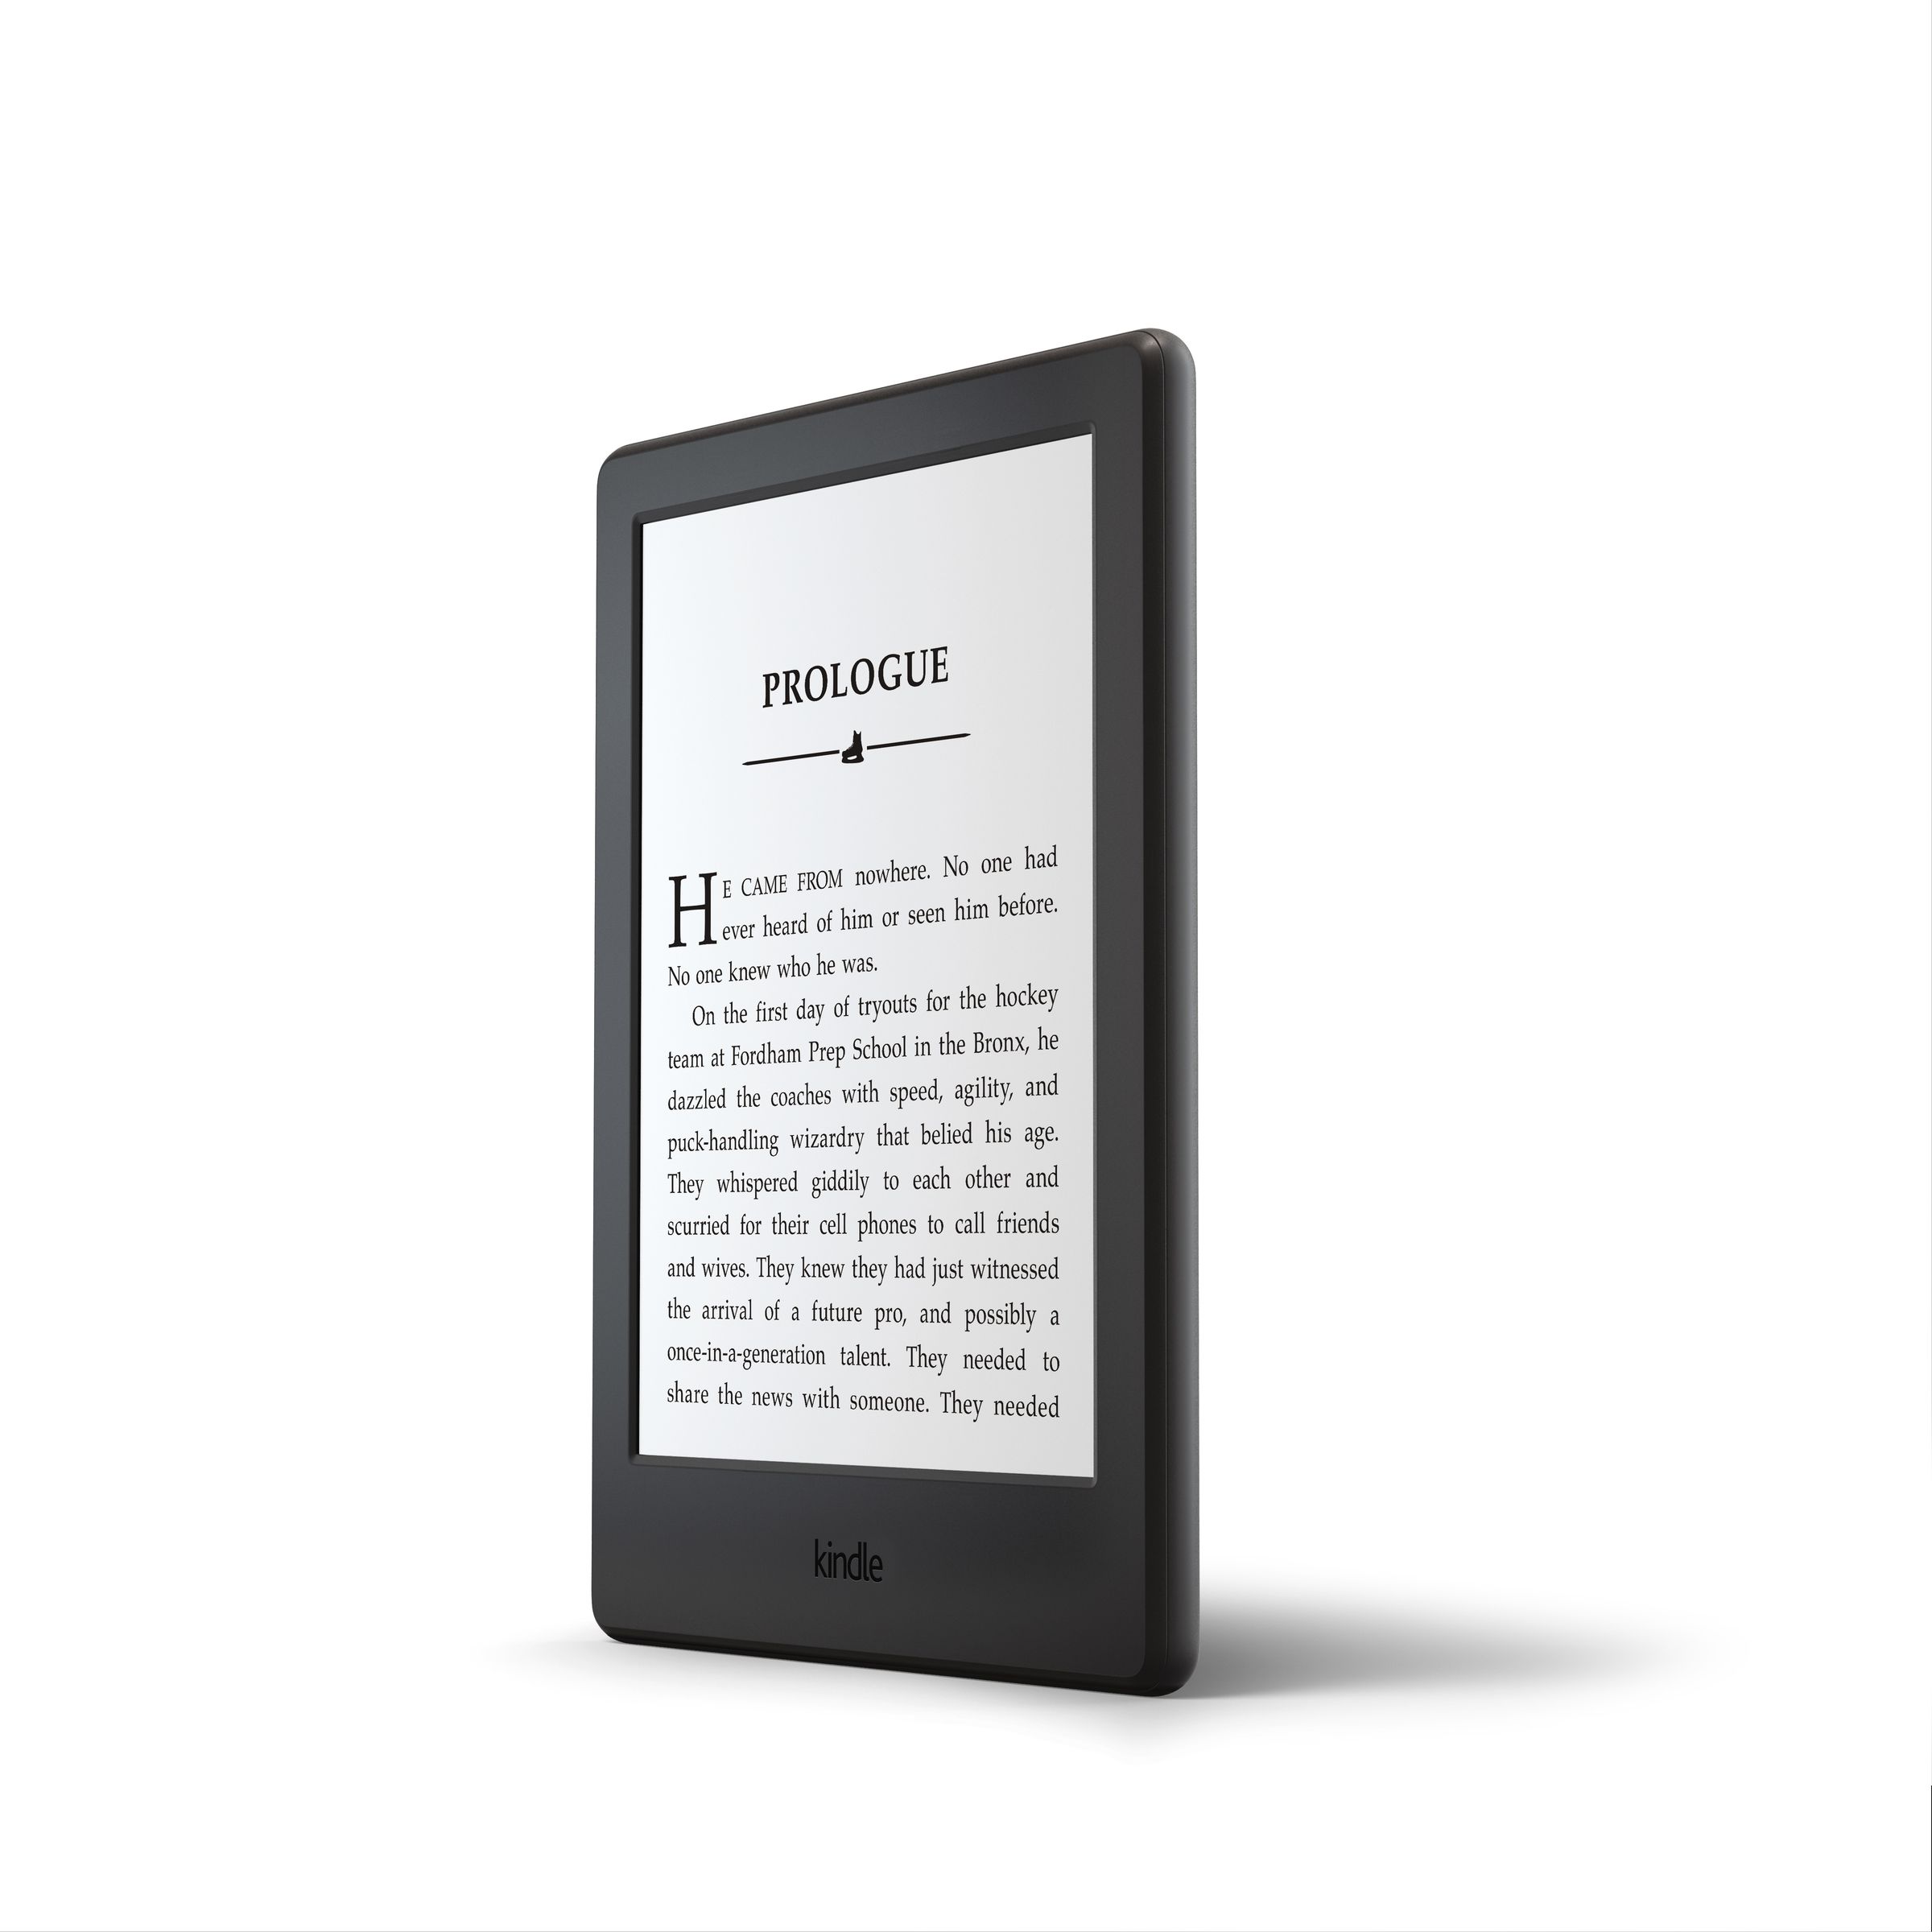 Amazon's new $79.99 Kindle comes in white